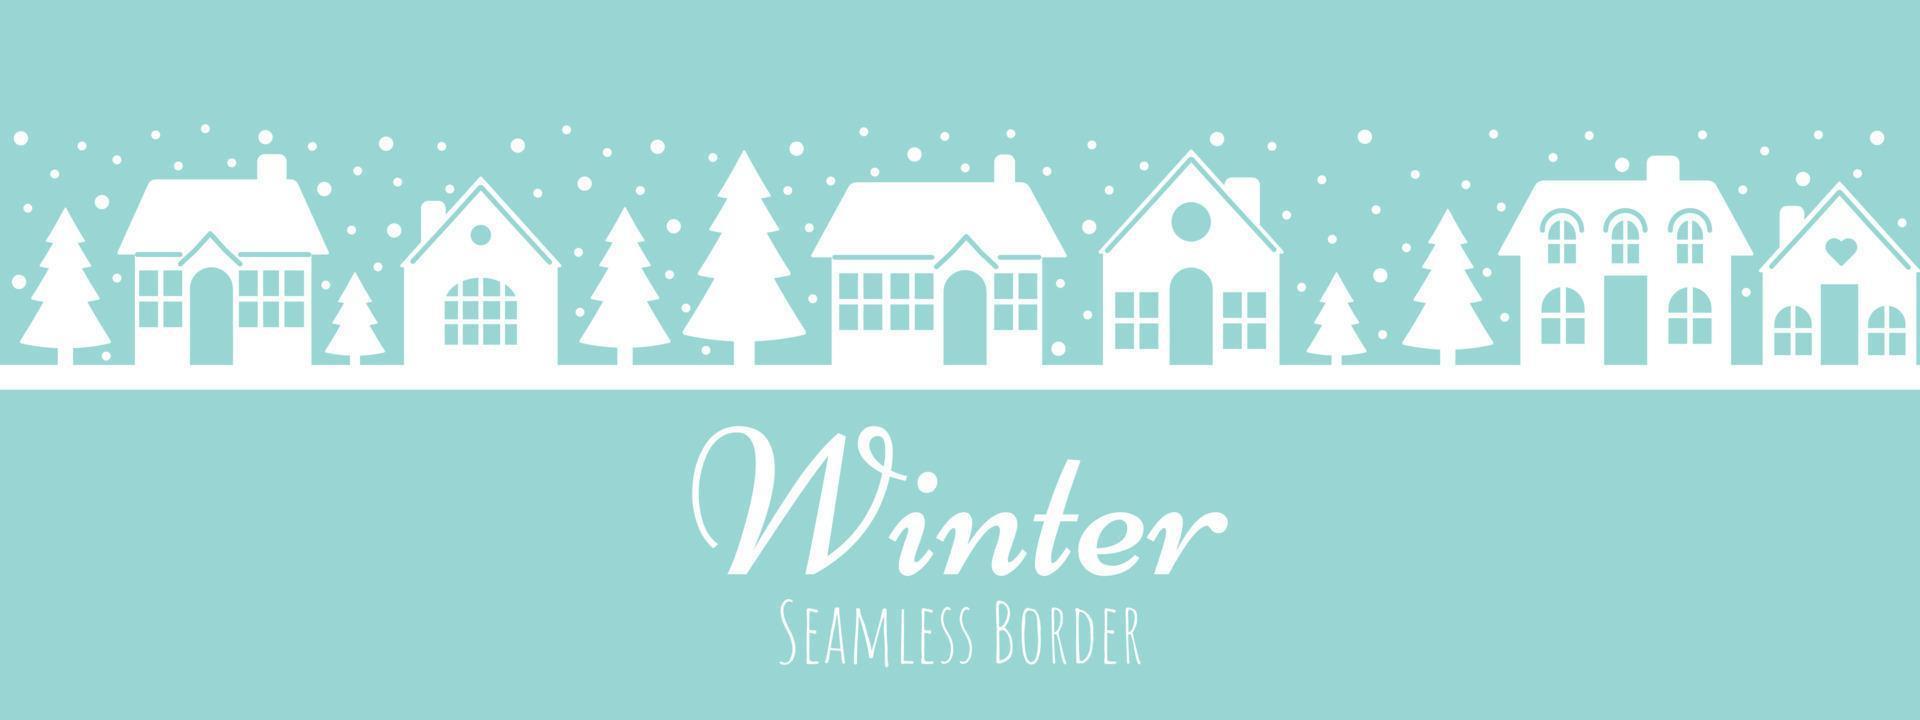 Winter seamless border. City, houses, Christmas trees, snow. New Year symbols.Trendy retro style. Vector design template. Christmas and Happy New Year